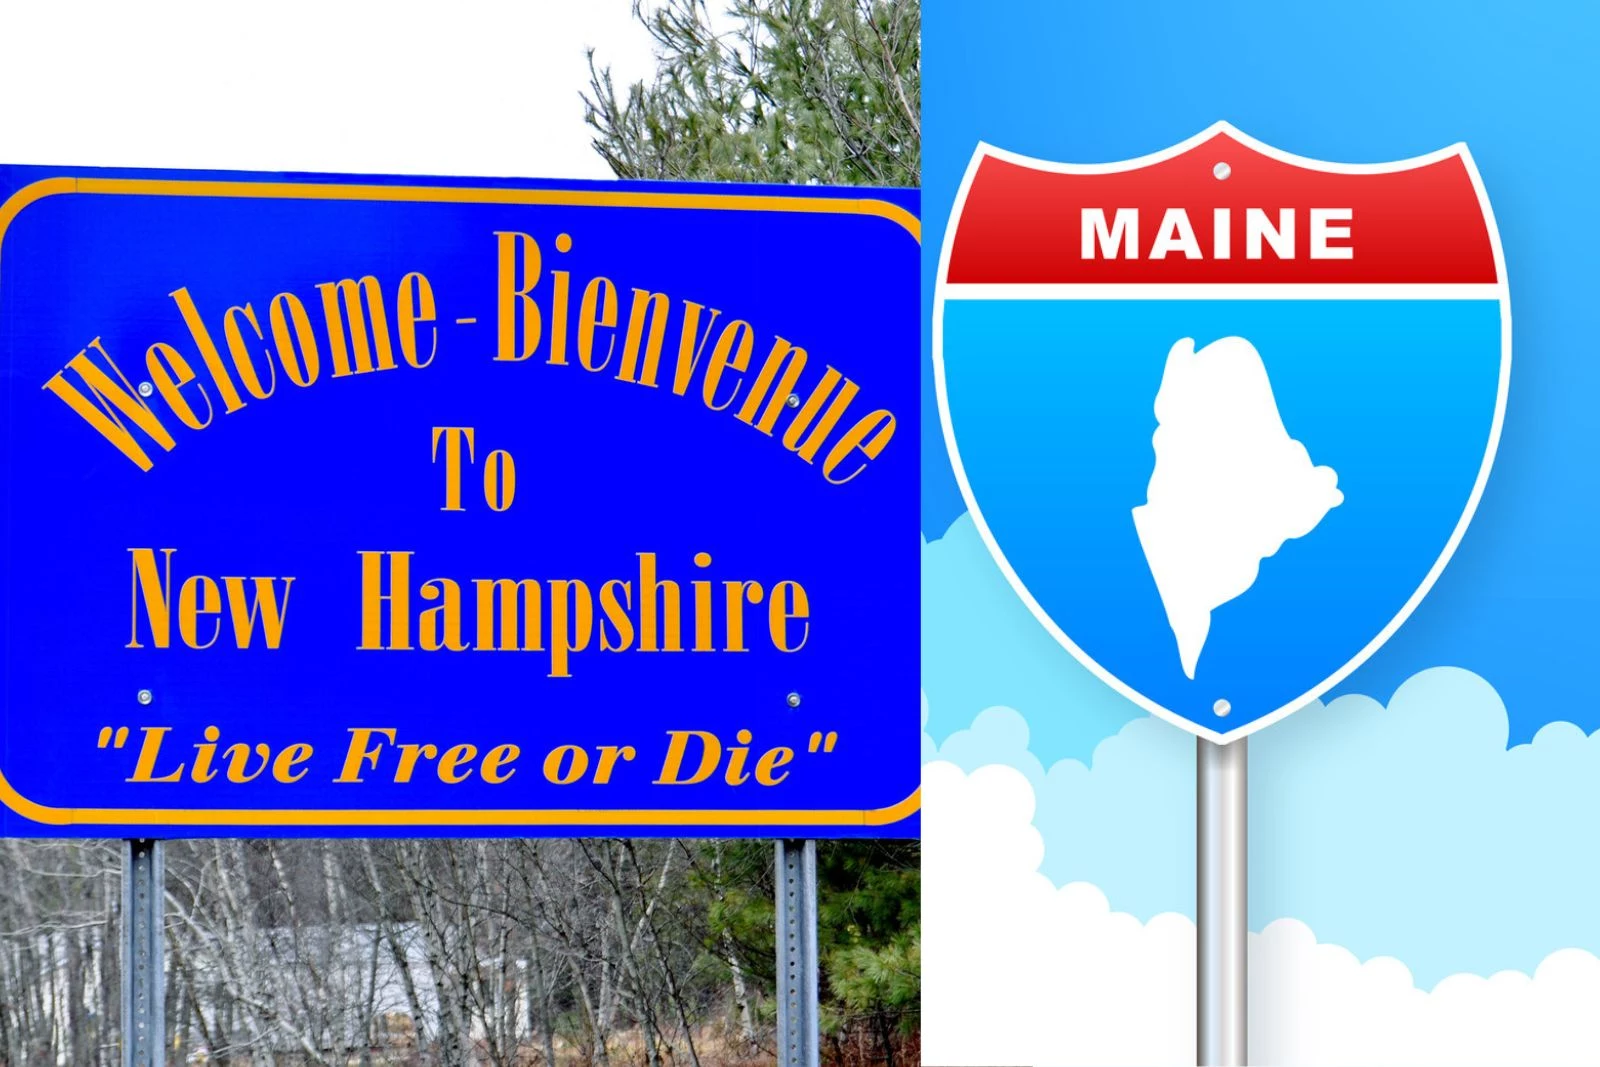 Did You Know Maine and New Hampshire Share at Least 5 Town Names?